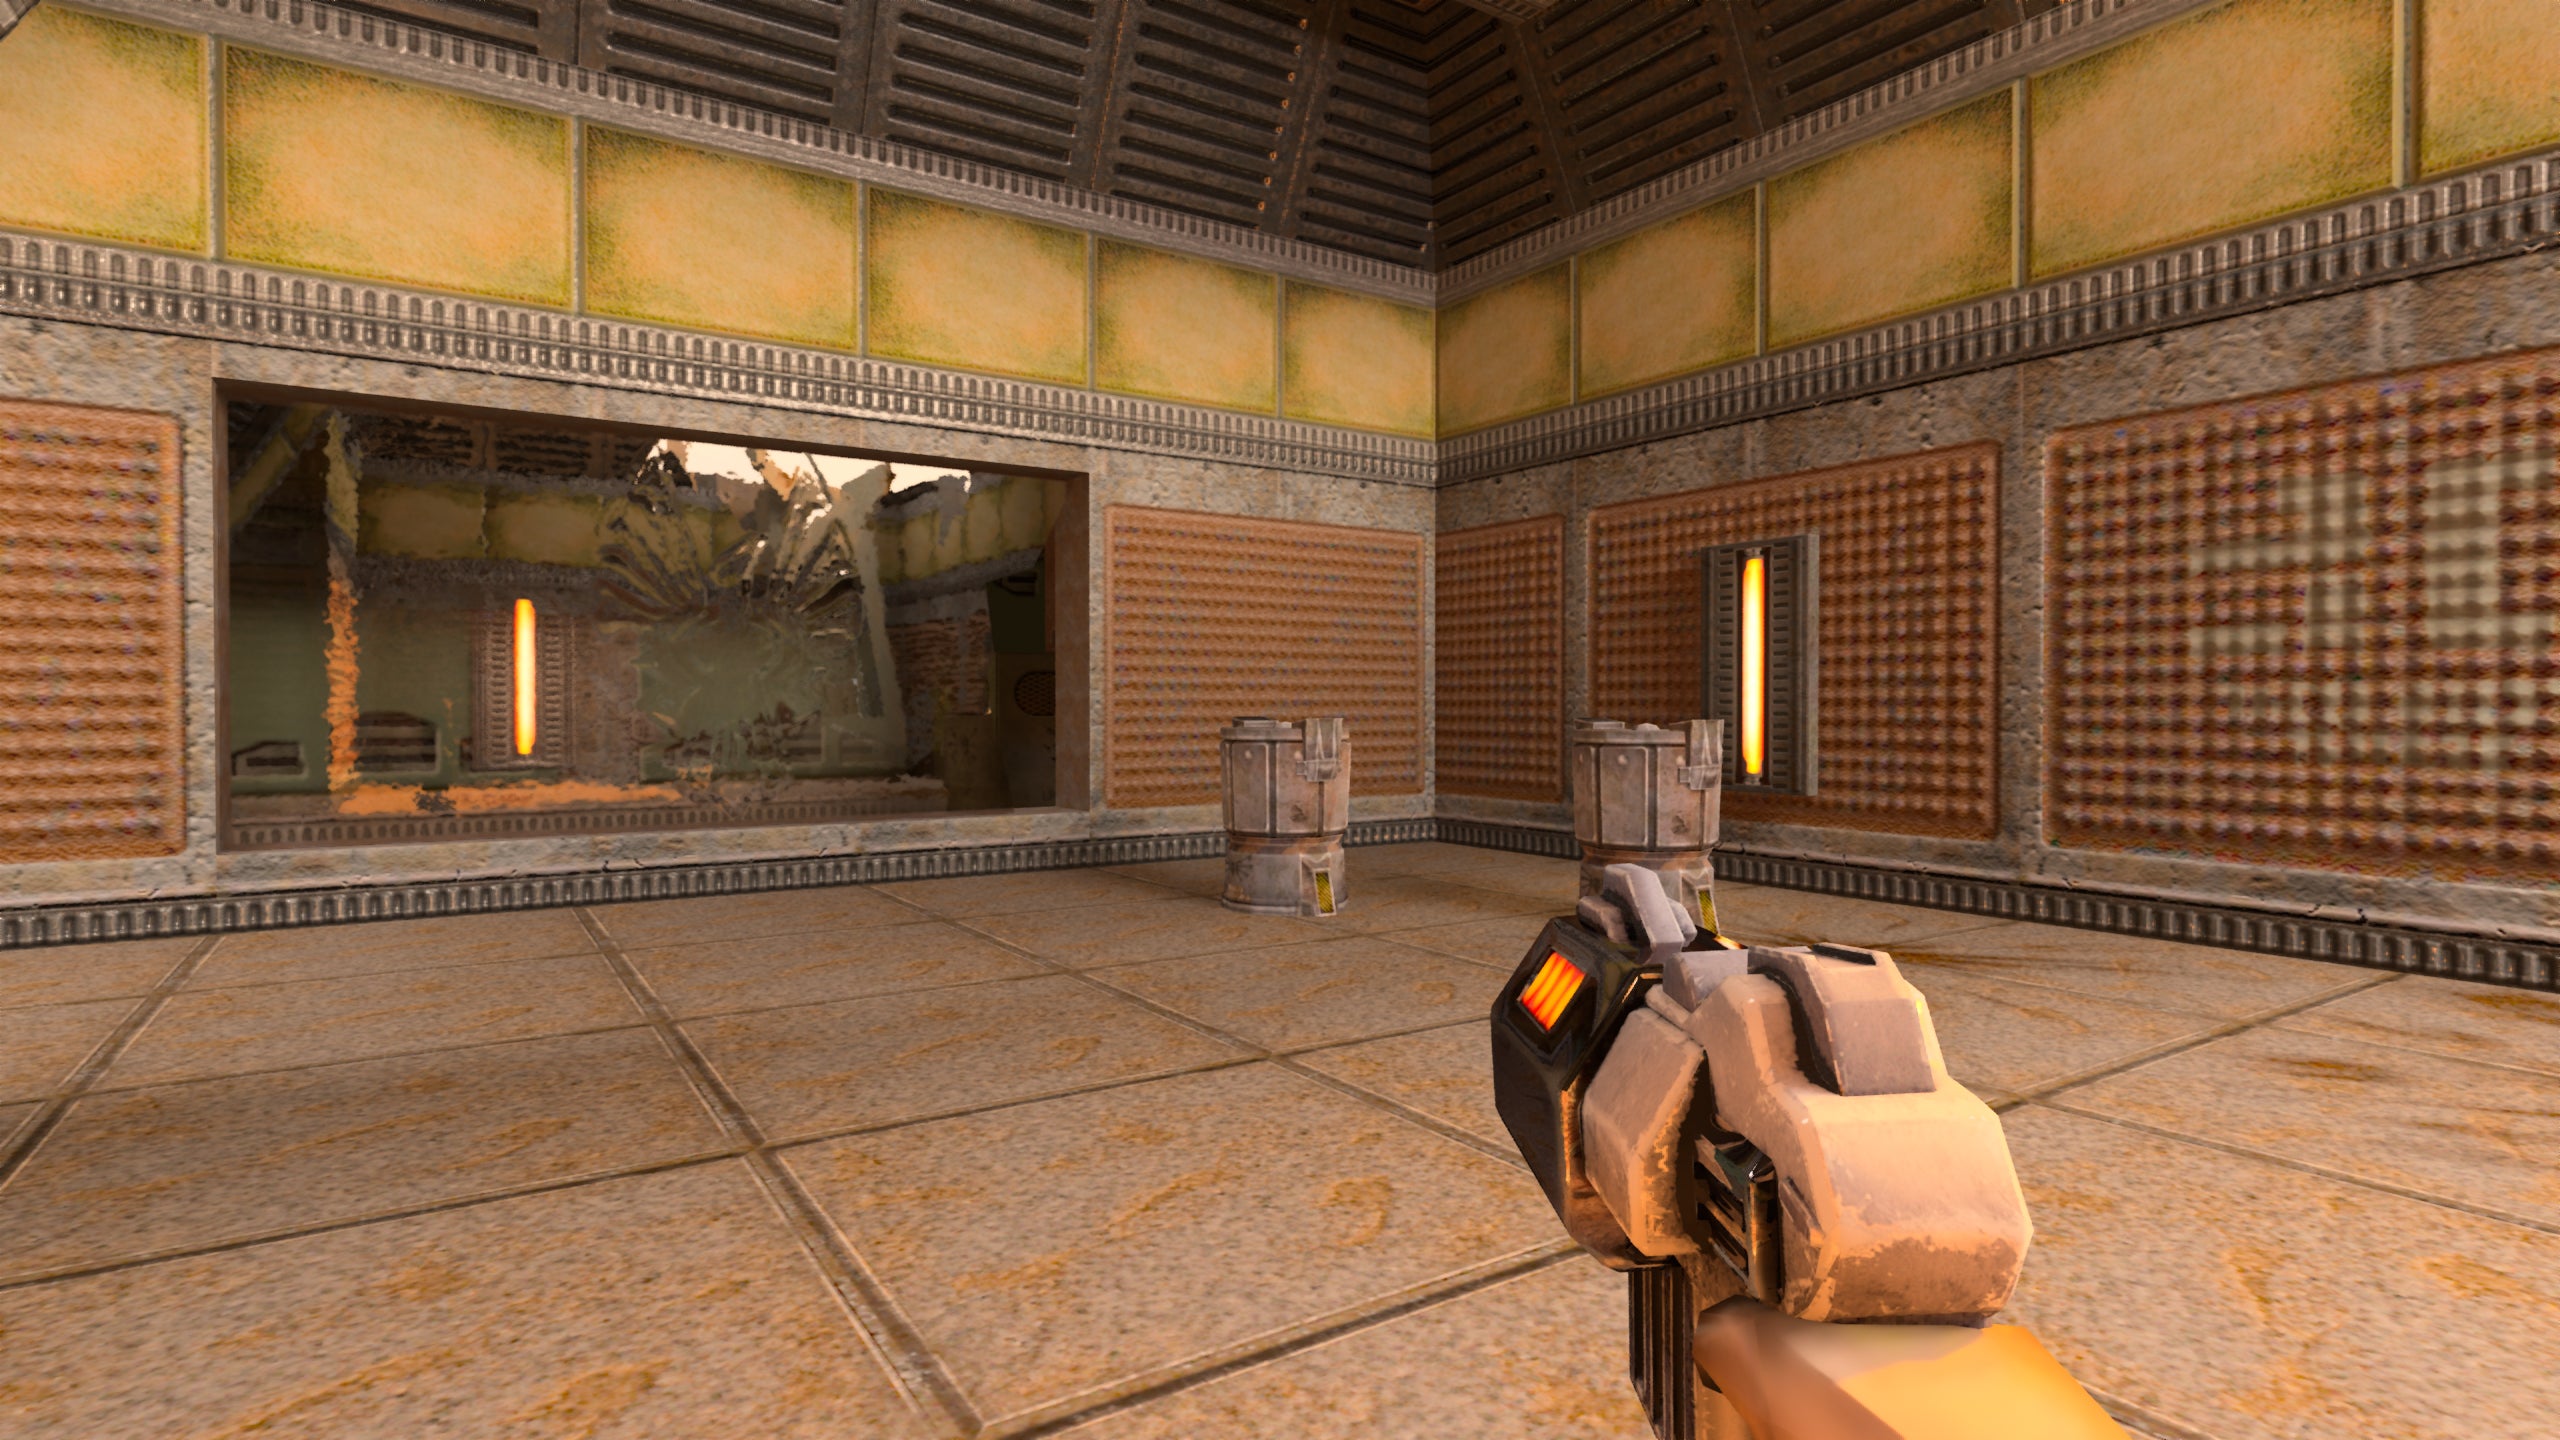 Image for Nvidia are planning more ray traced remasters of classic PC games like Quake II RTX